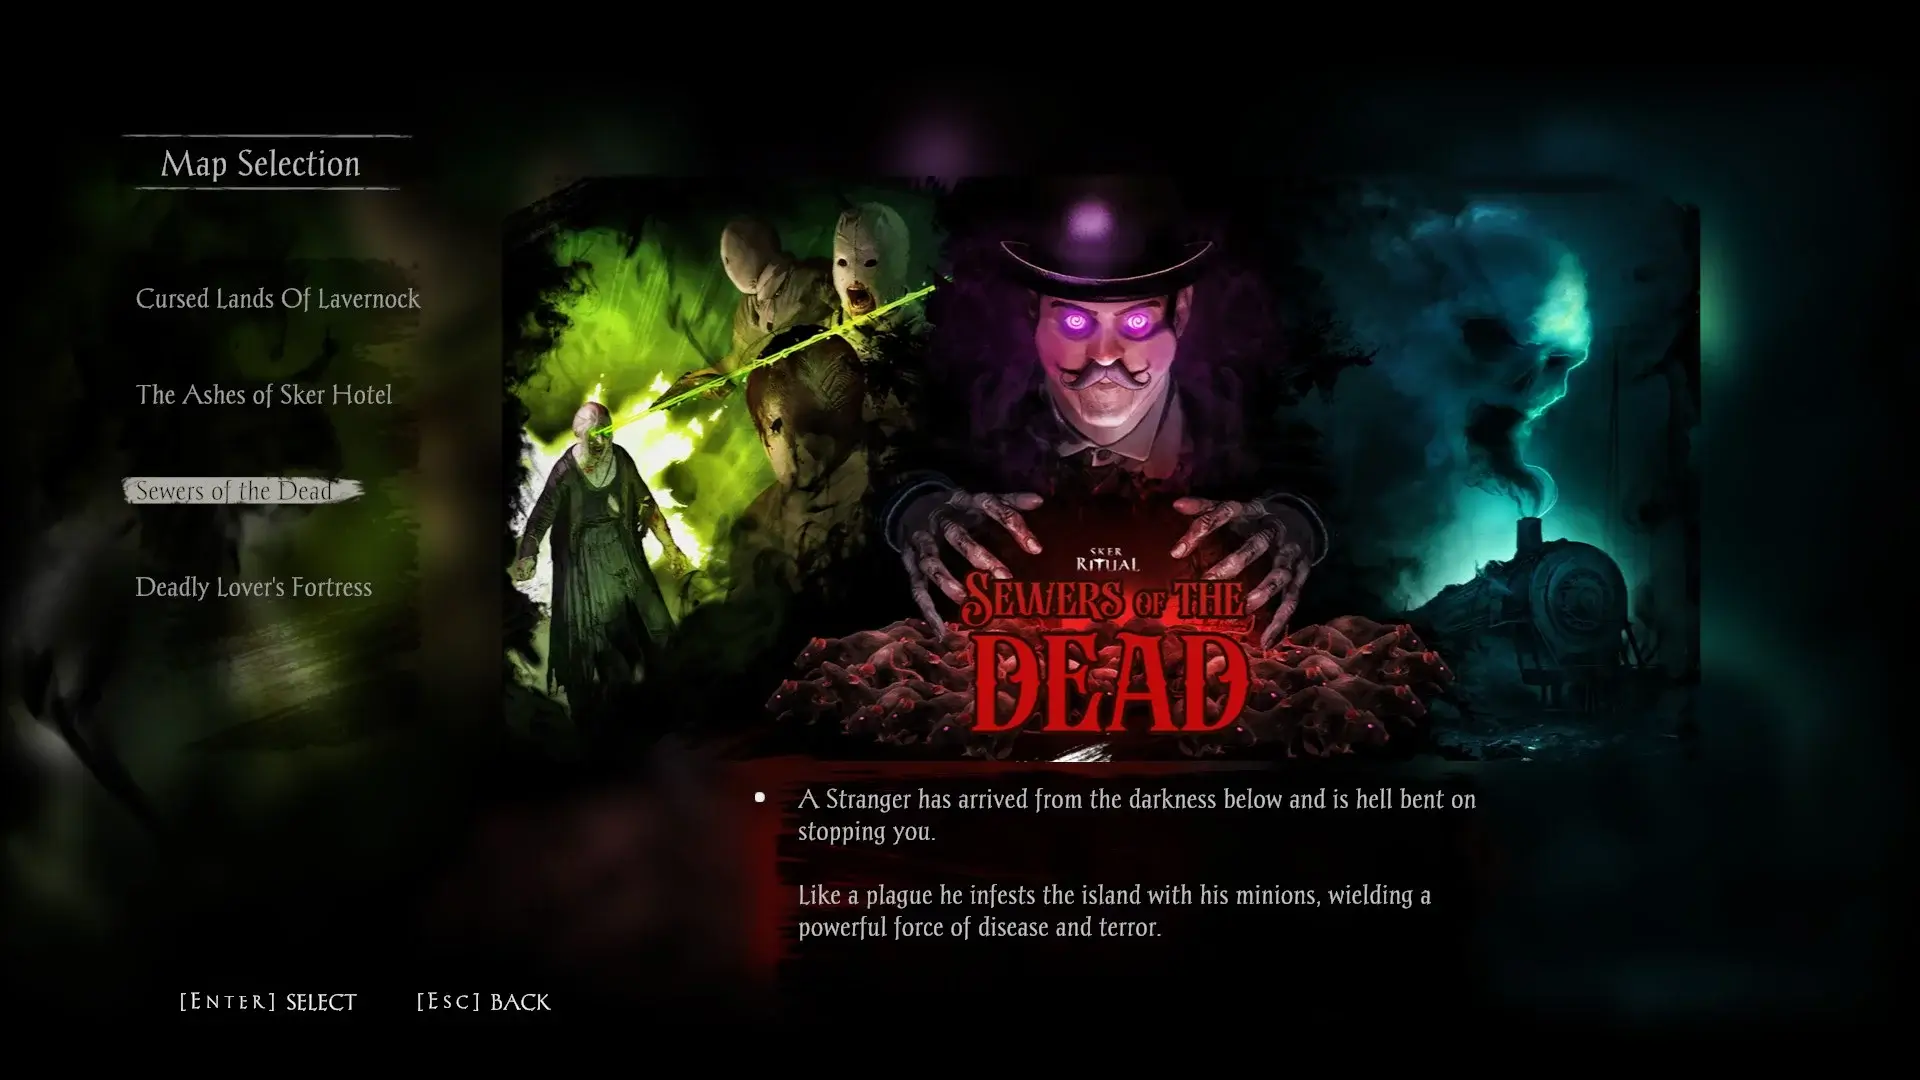 an image of the map selection screen. On the left hand side are the four map titles with the Sewers of the dead currently highlighted. The main picture shows a man with a small mustache and bowler hat. His eyes are glowing pinkish purple. On the sides of him are tow other images, the left is green and has faceless people and the right is blue with a train. The smoke of the trains spout has taken the form of a skull. 